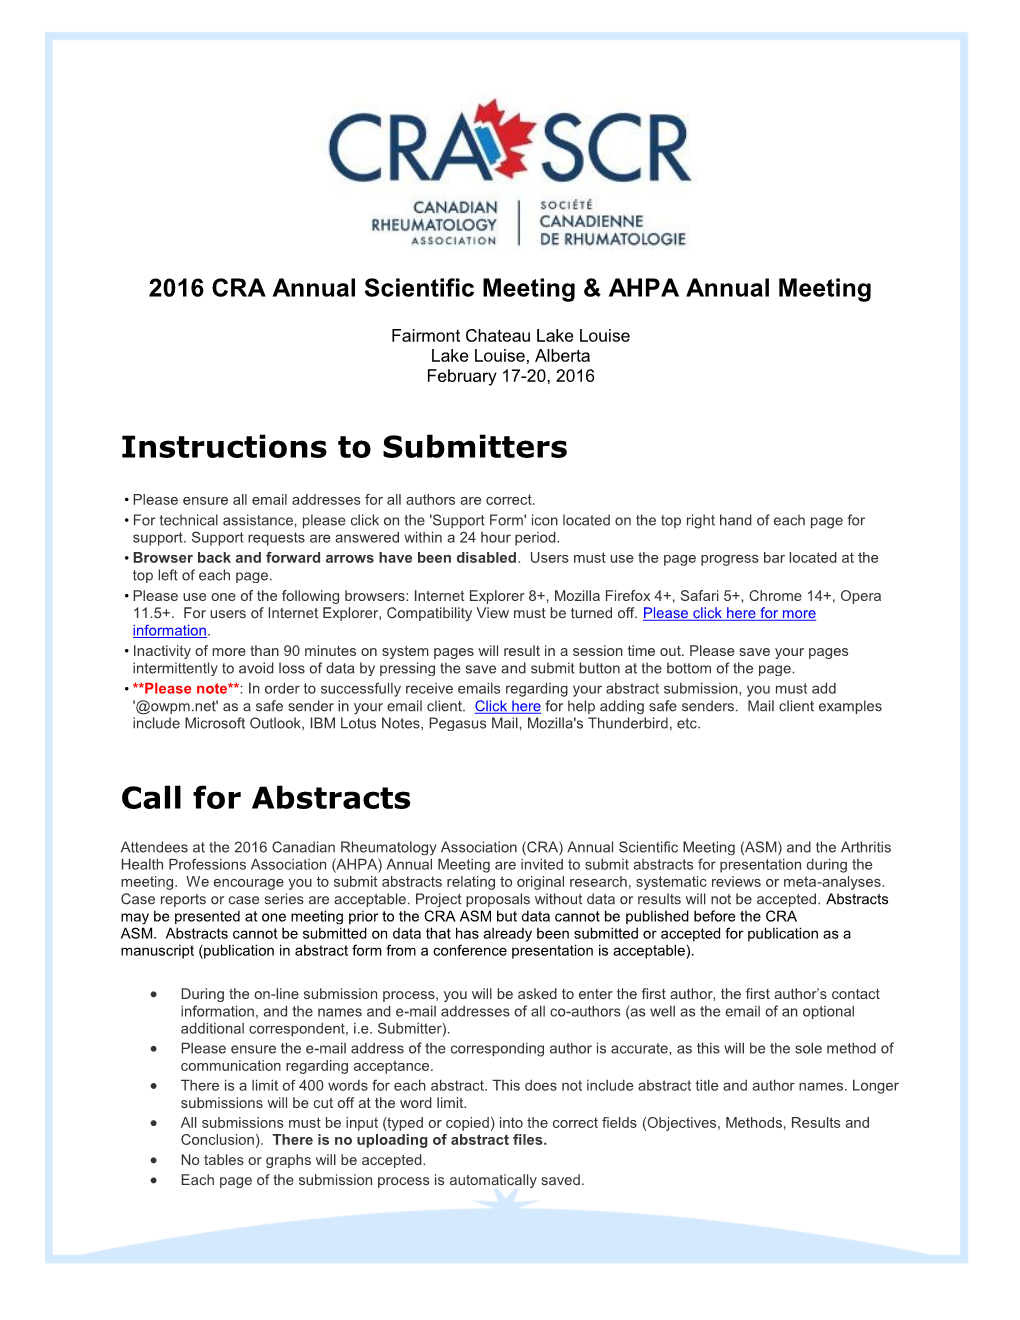 Instructions to Submitters Call for Abstracts